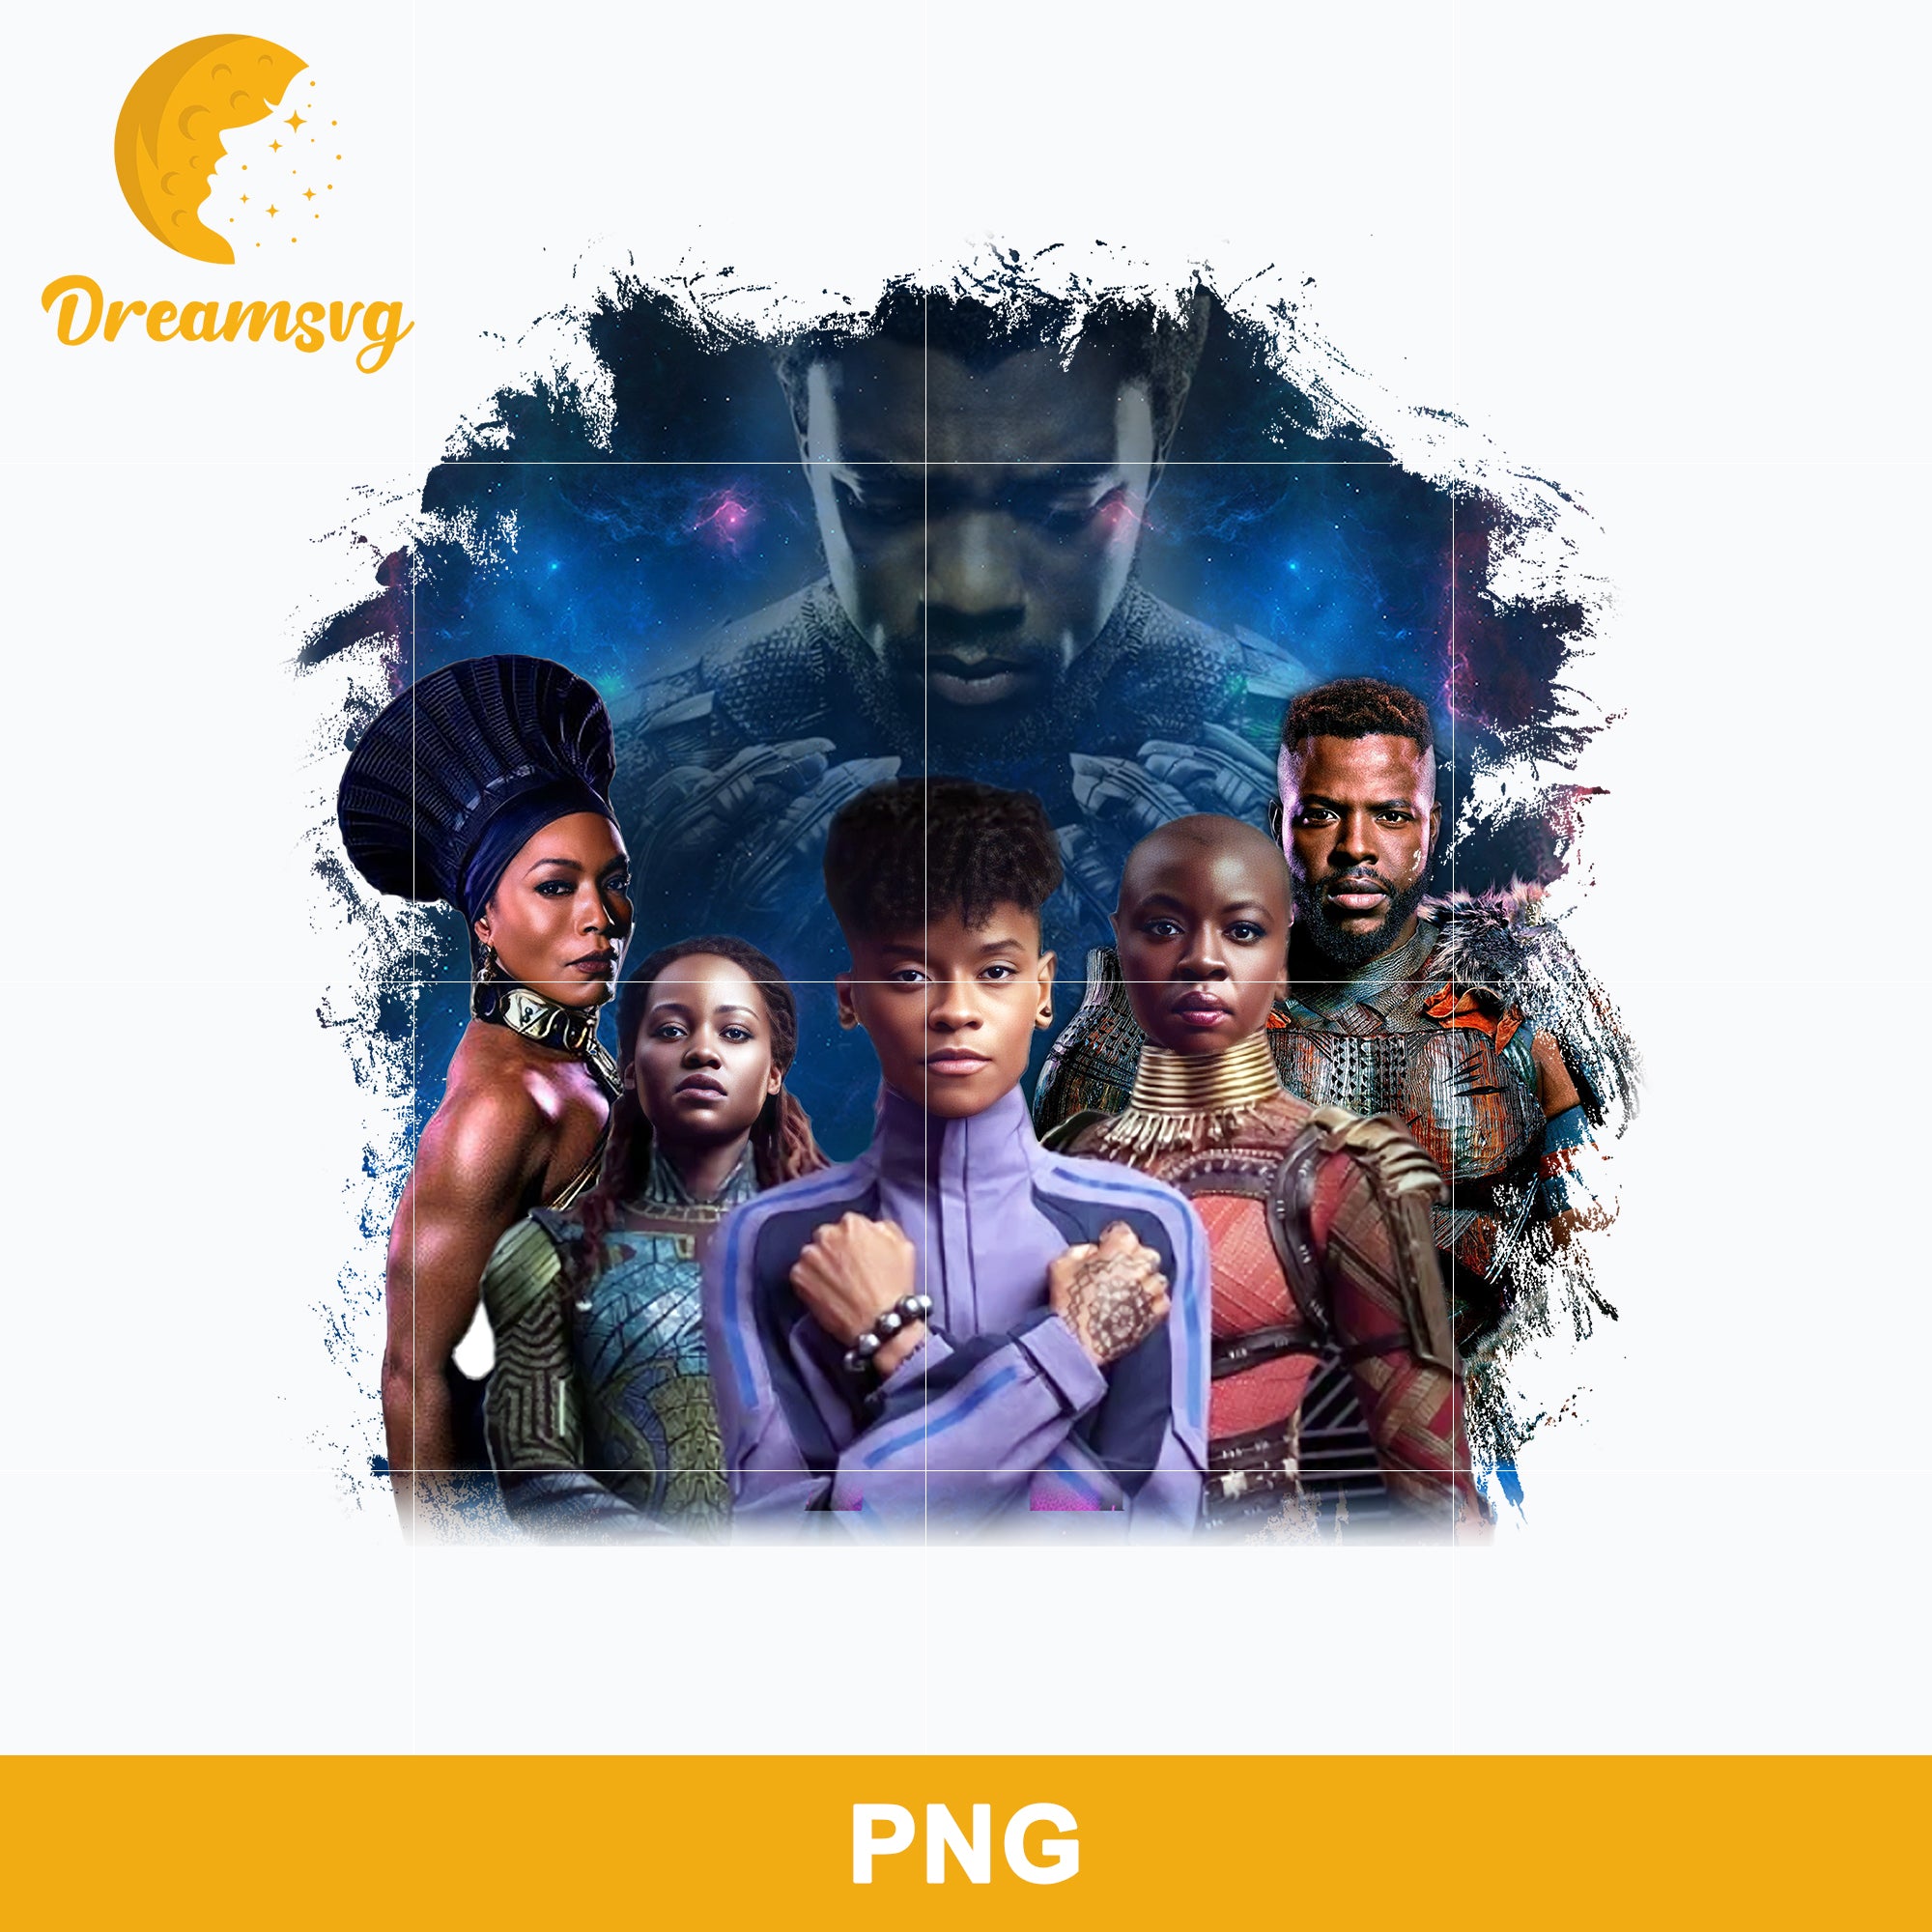 Black Panther PNG, Wakanda Forever PNG, Avengers Black Panther PNG